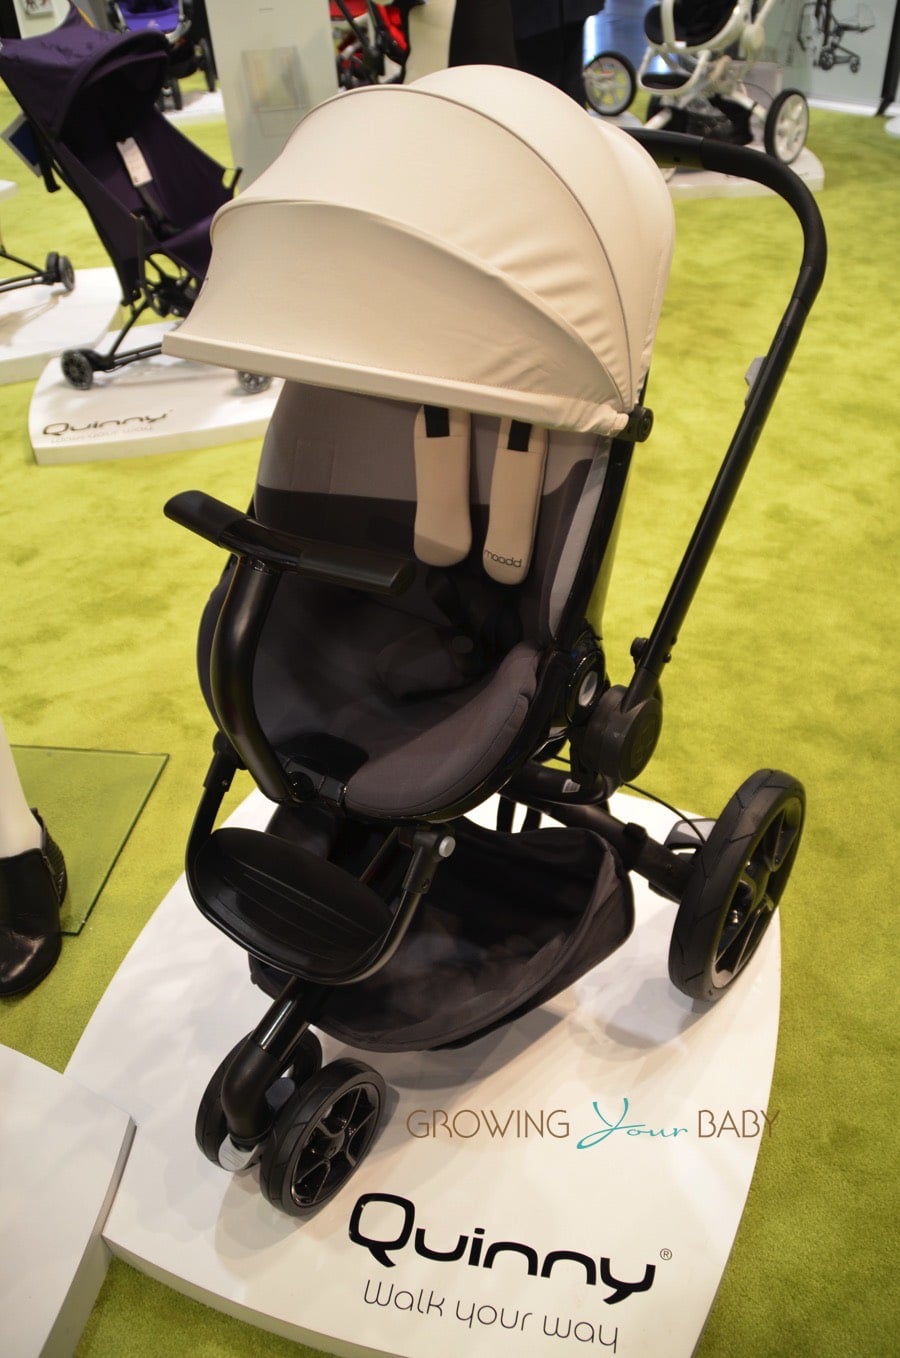 stroller with large sun canopy